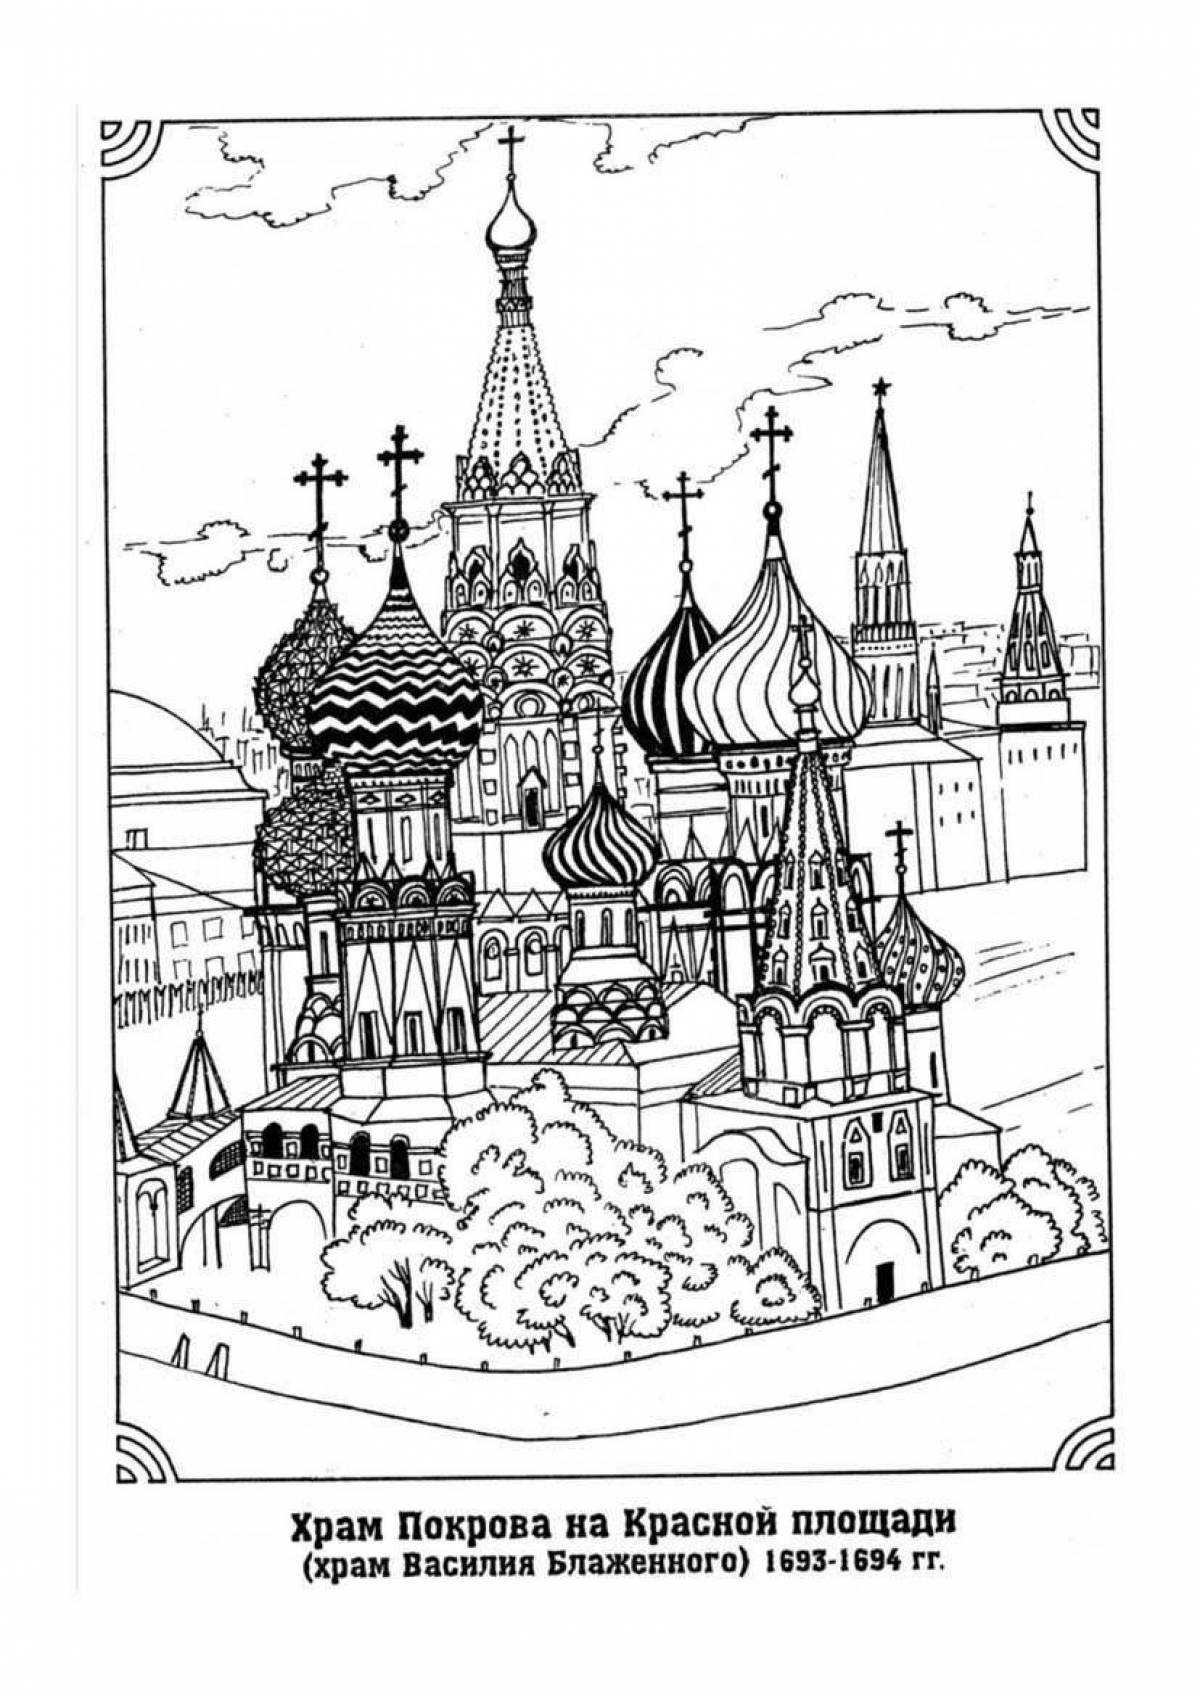 Great coloring of the sights of Russia